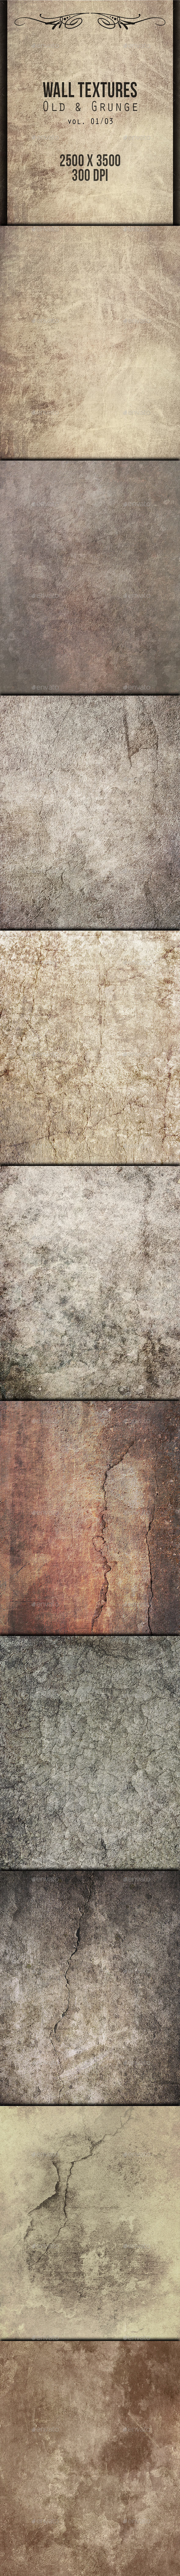 Wall textures old grunge 01 preview